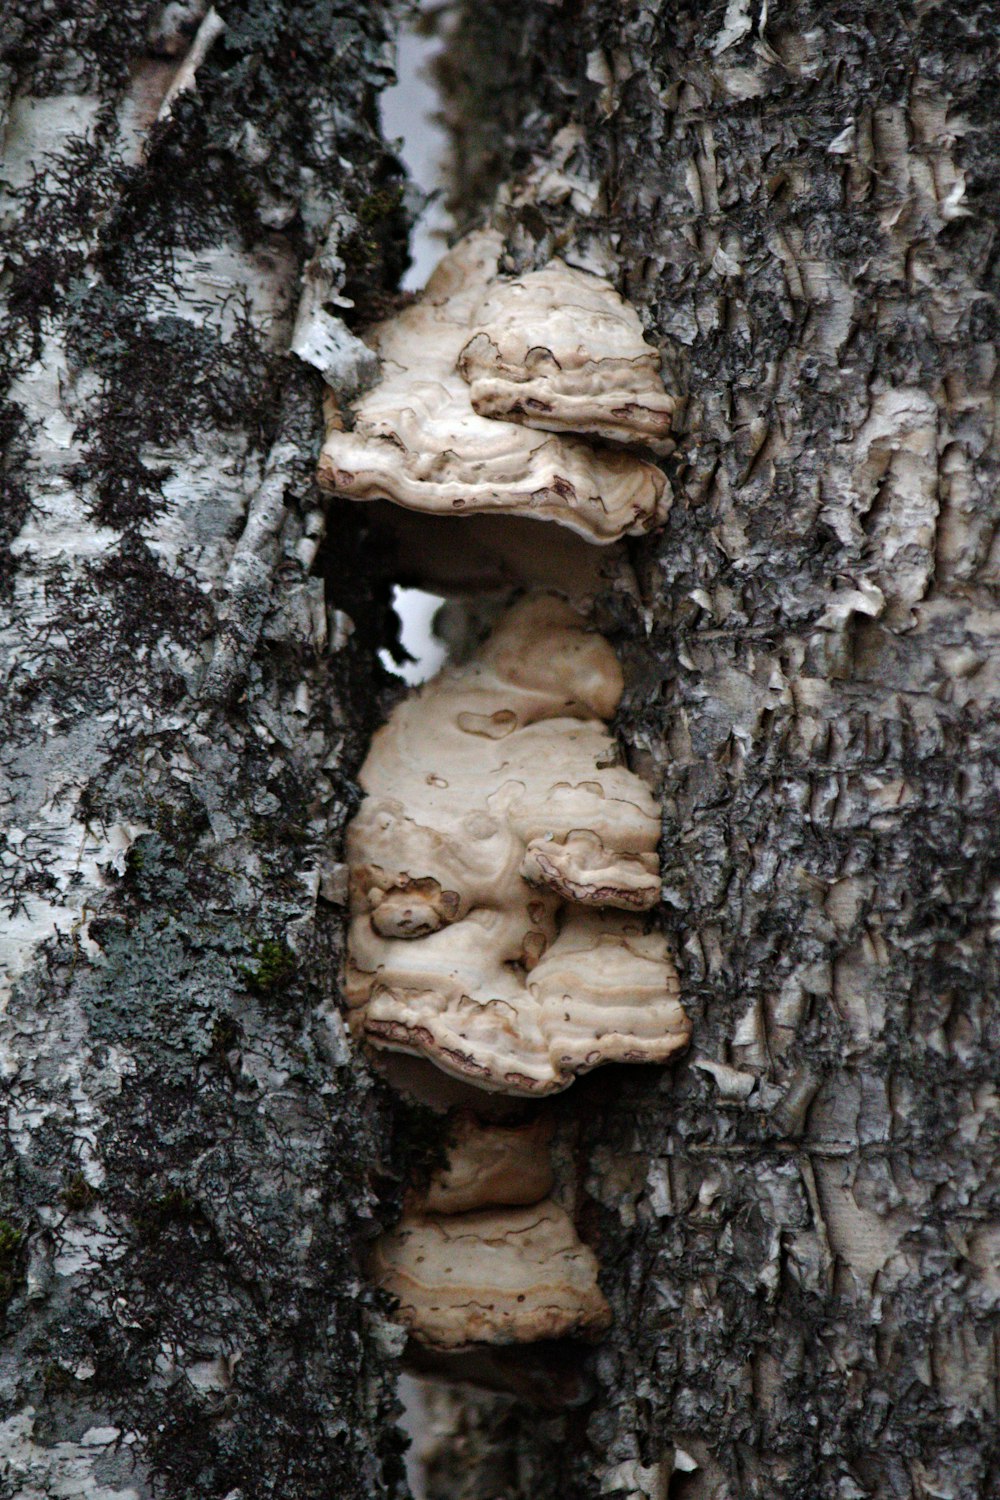 a group of mushrooms growing on the bark of a tree